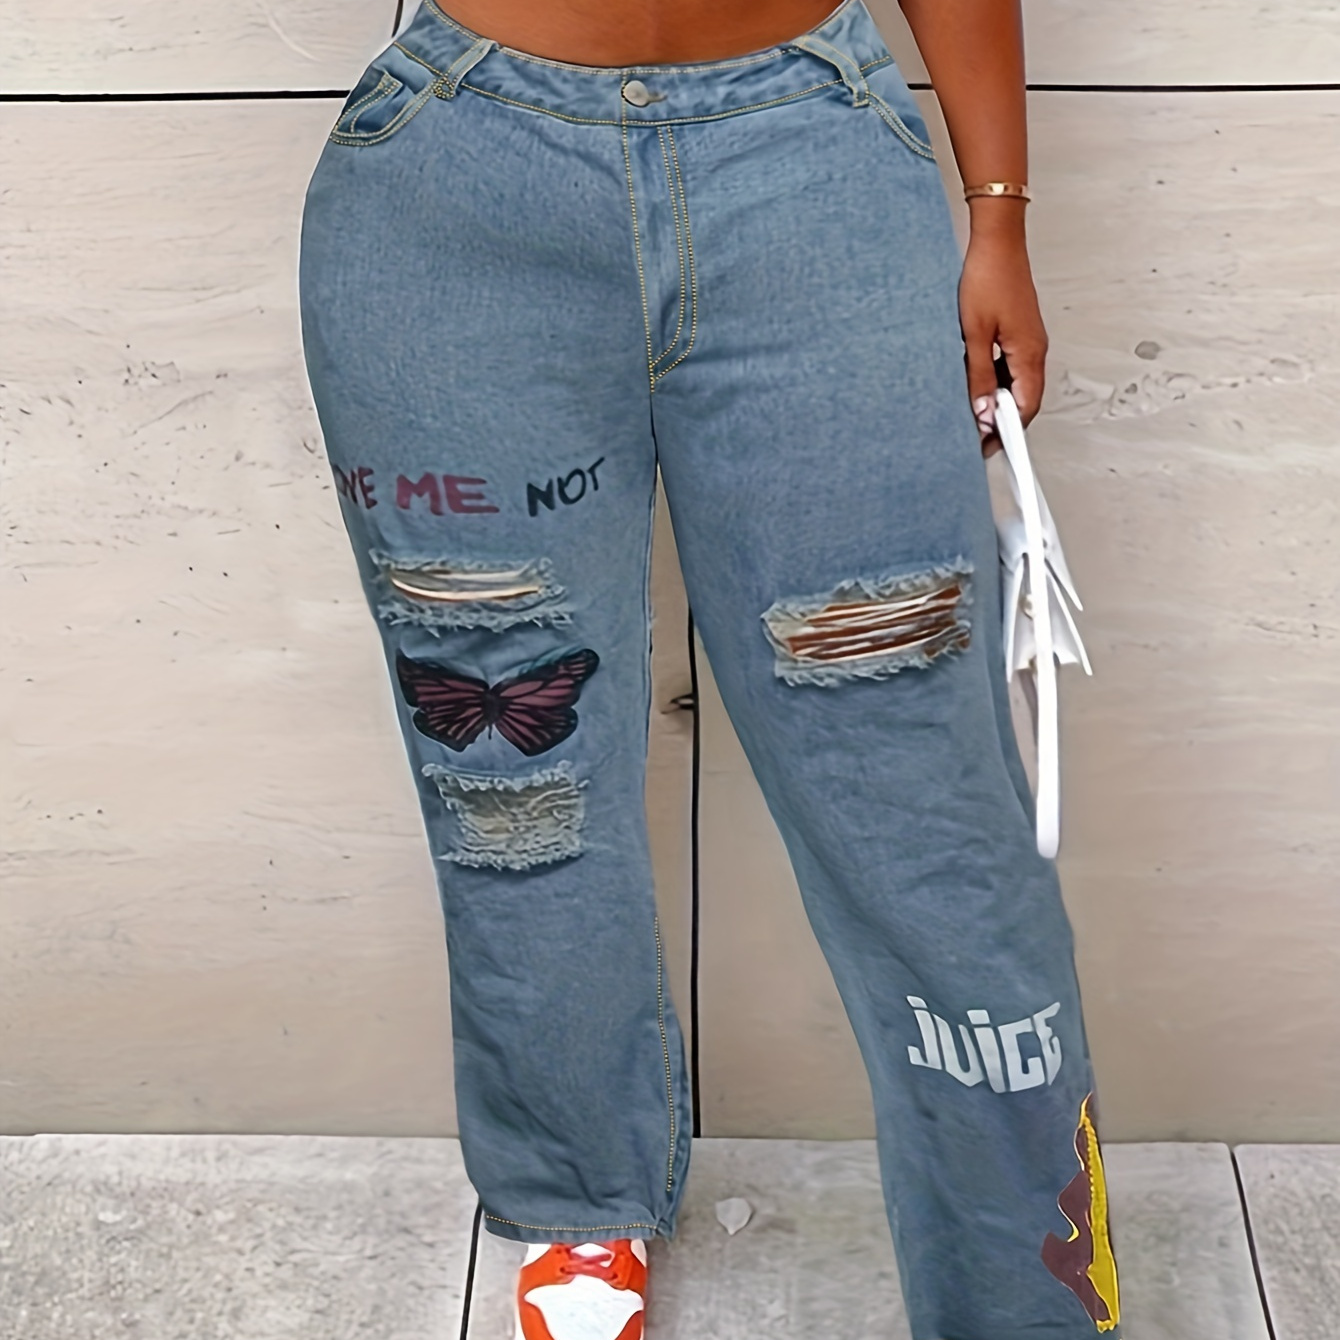 lystmrge Jeans That Make Your Butt Look Bigger Rip Pants for Women